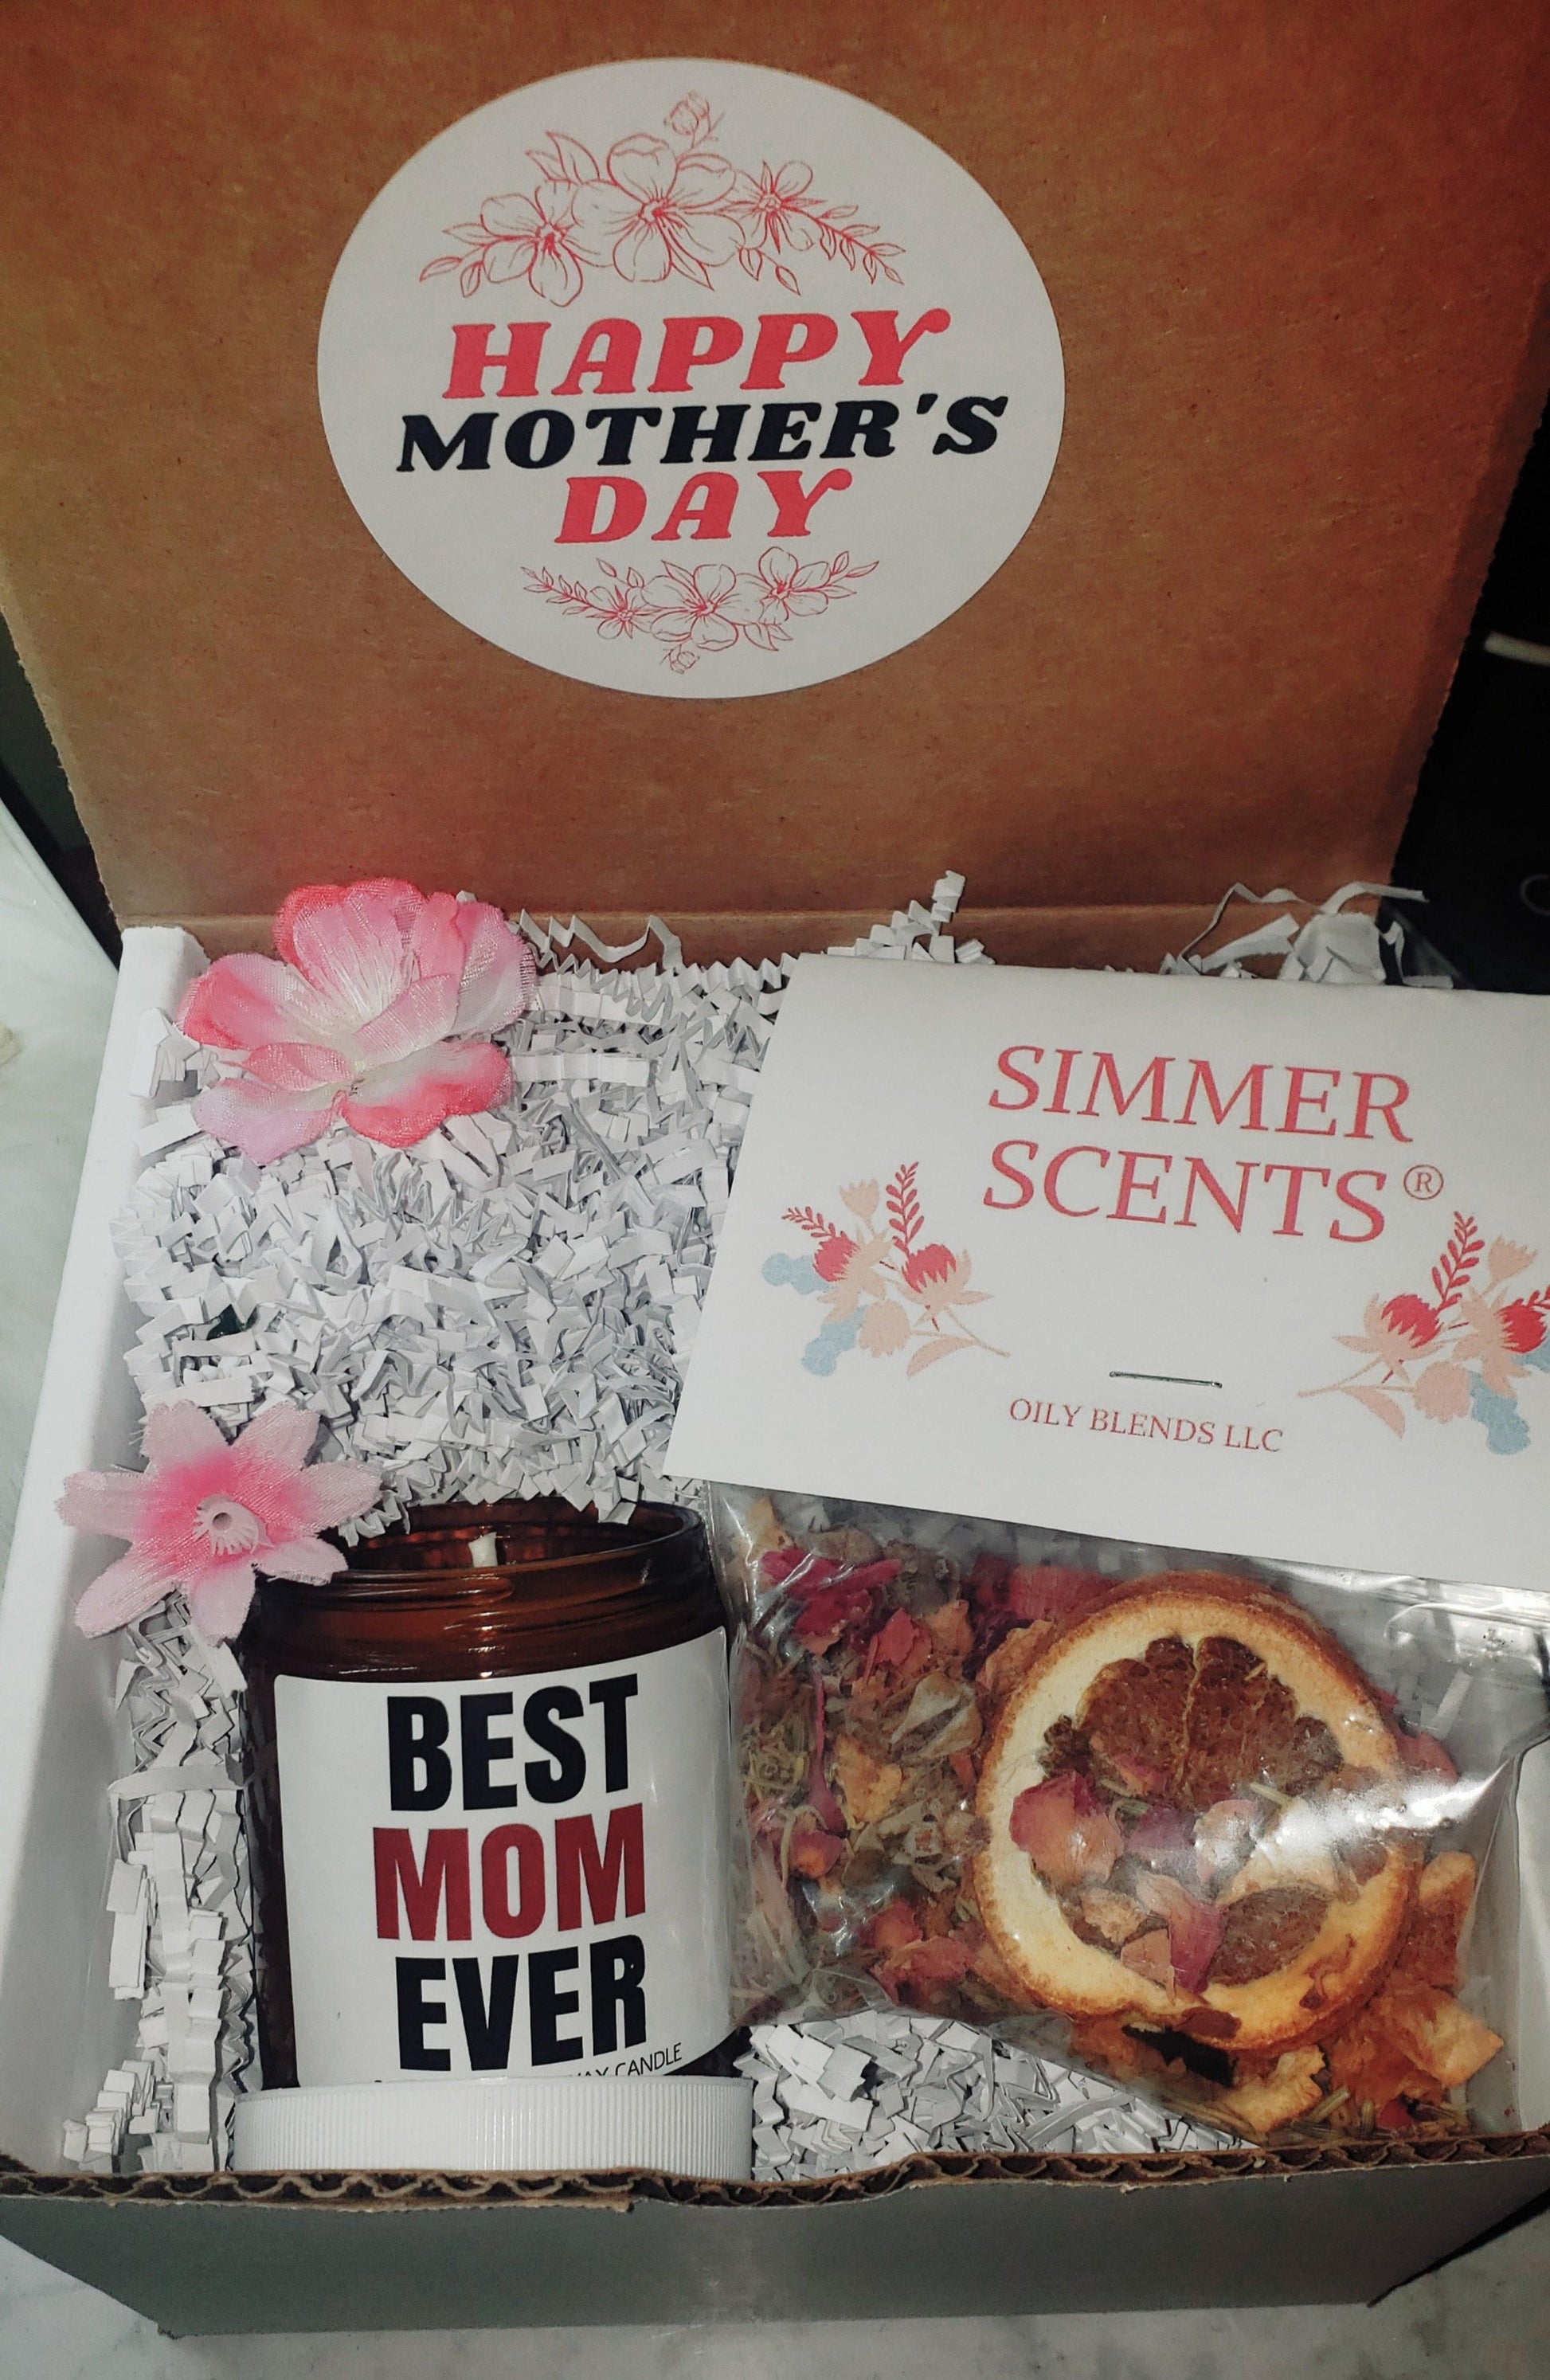 Mother's Day Gift Boxes - Twin Chronicles 